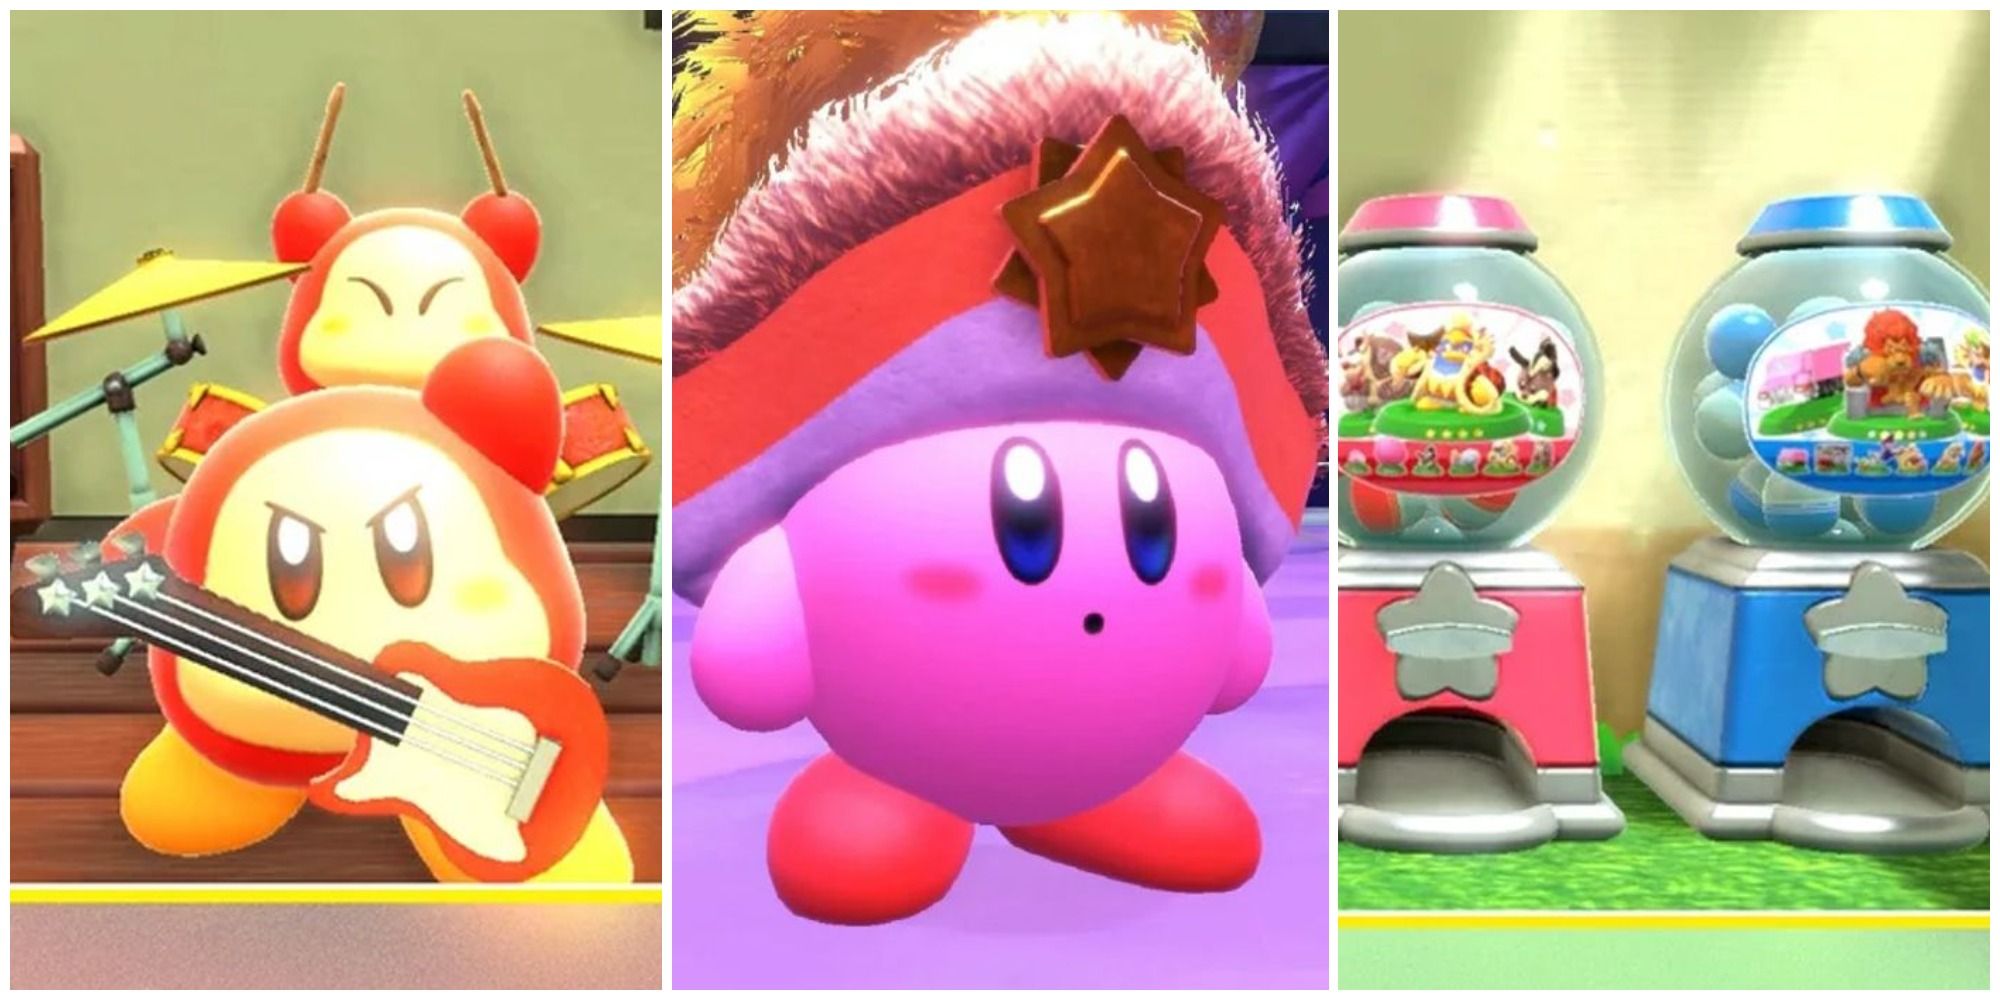 Kirby and the Forgotten Land: The long, complicated road to